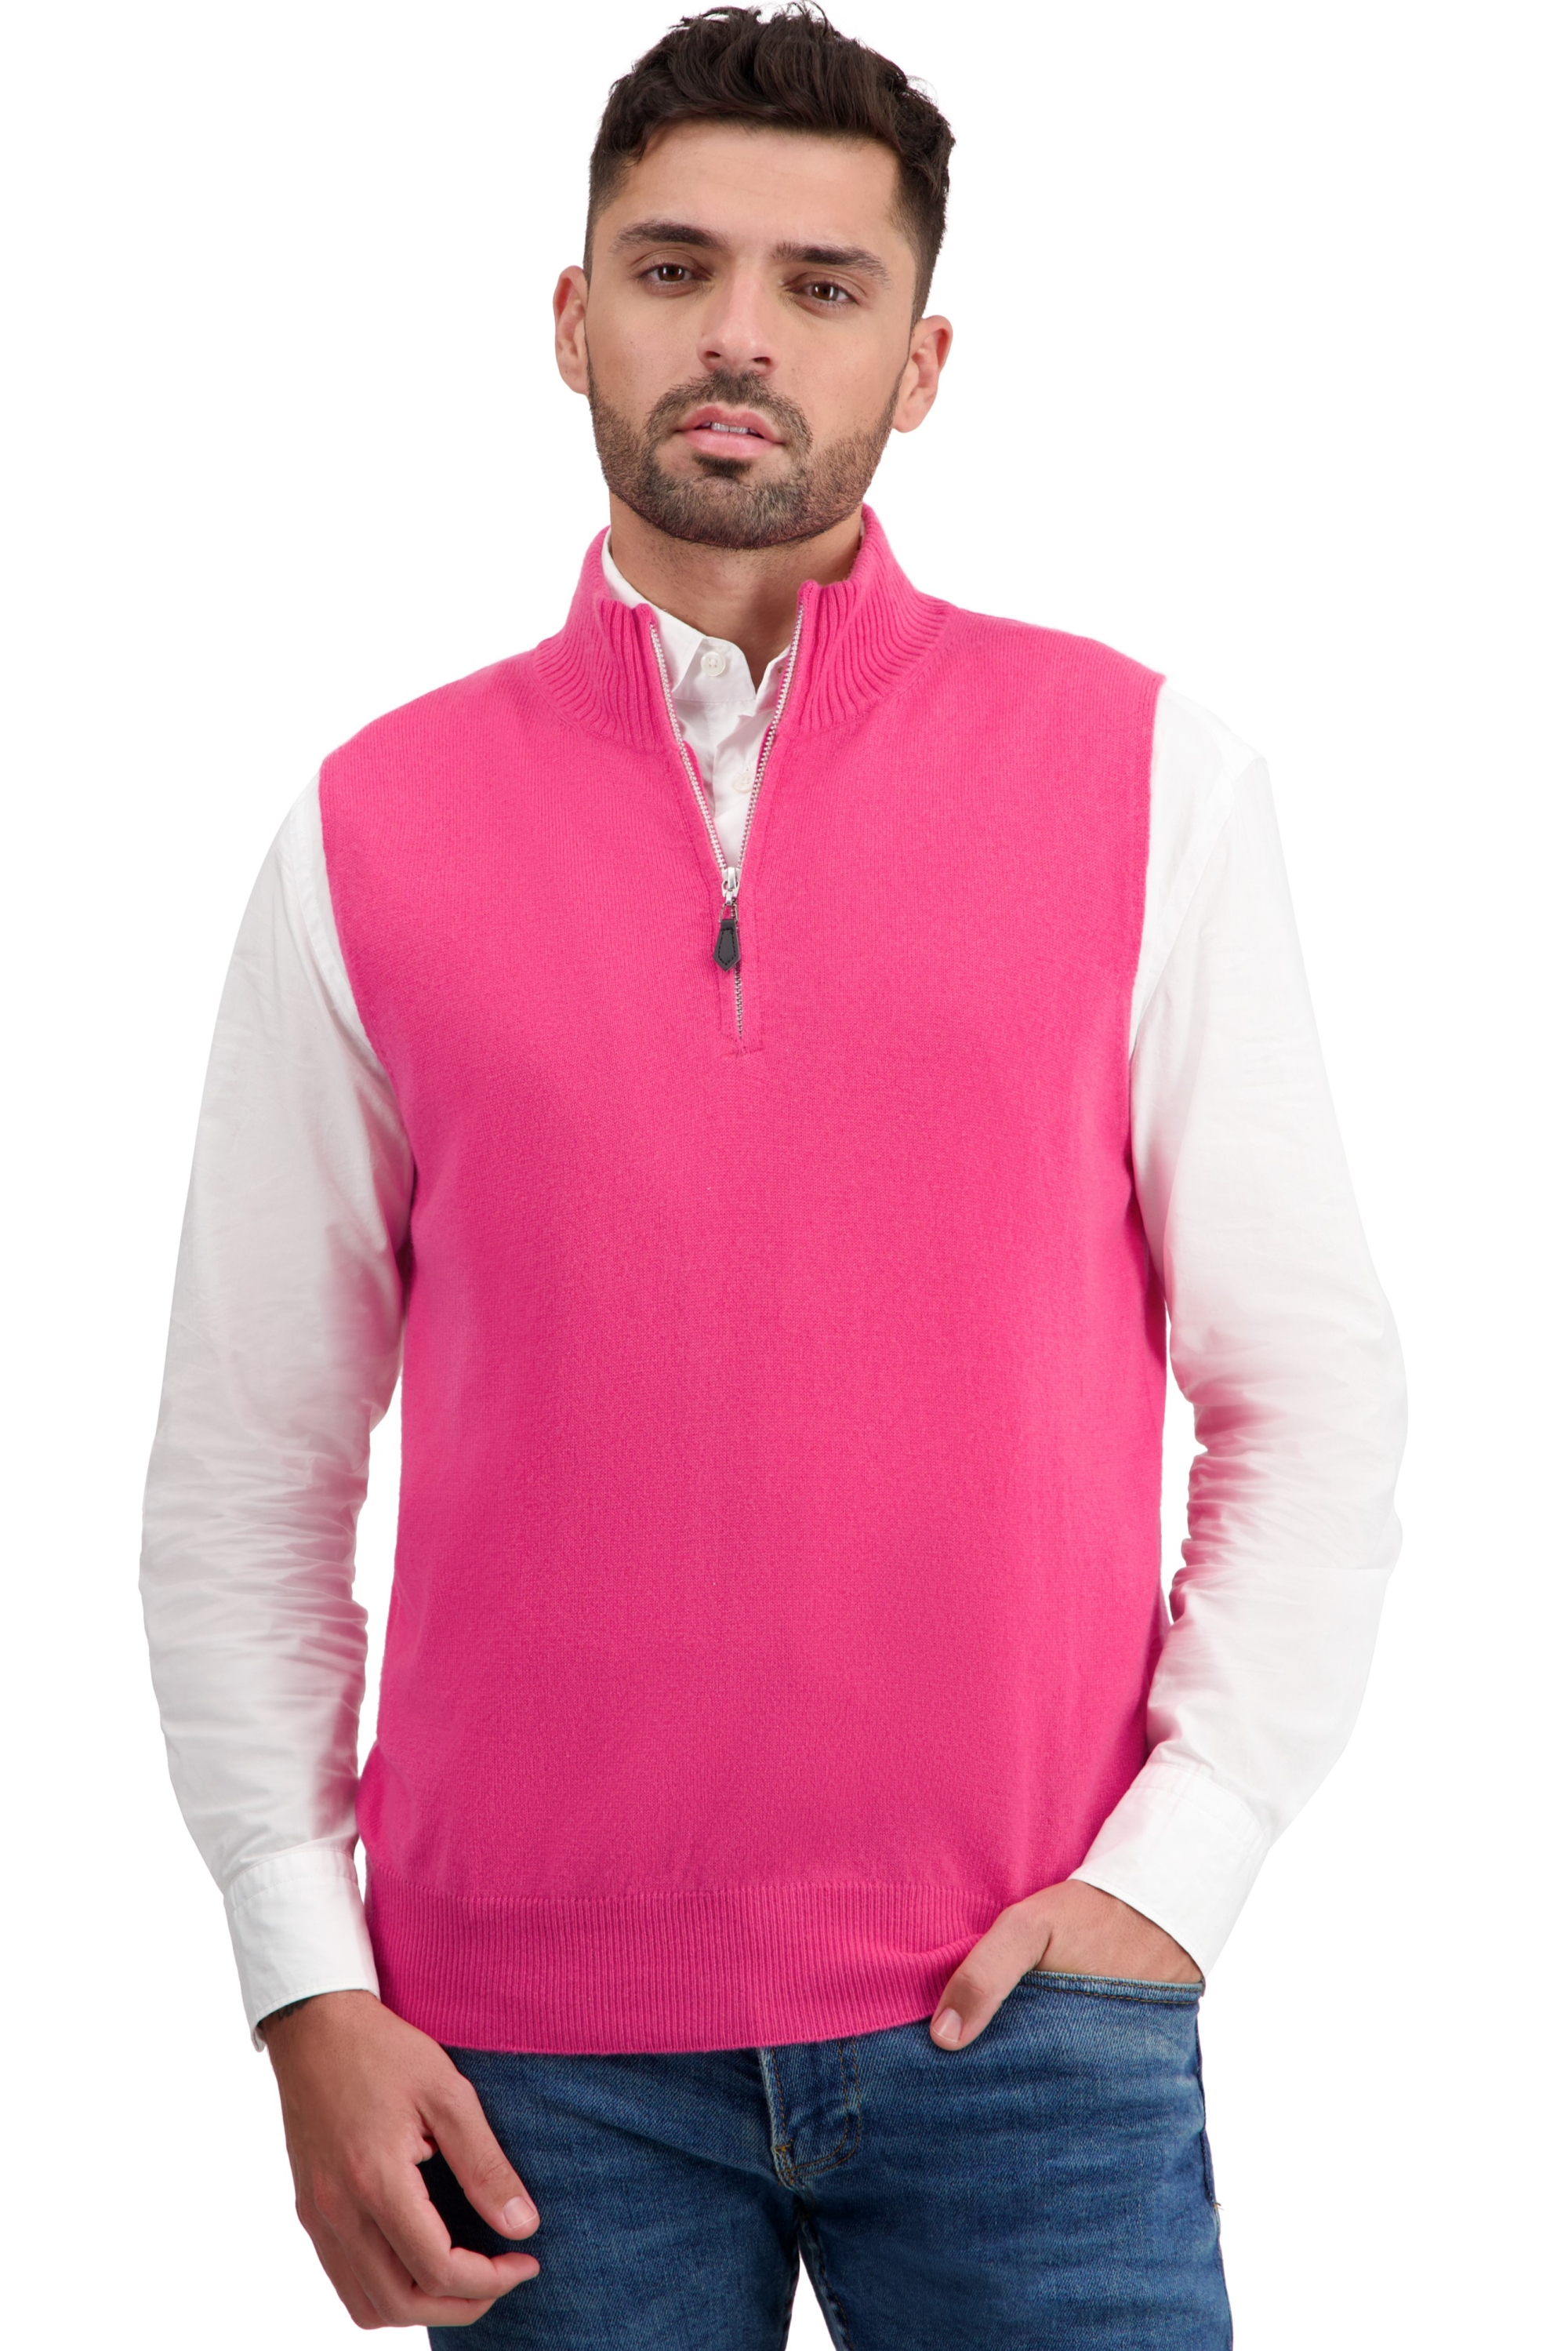 Cachemire pull homme texas rose shocking s